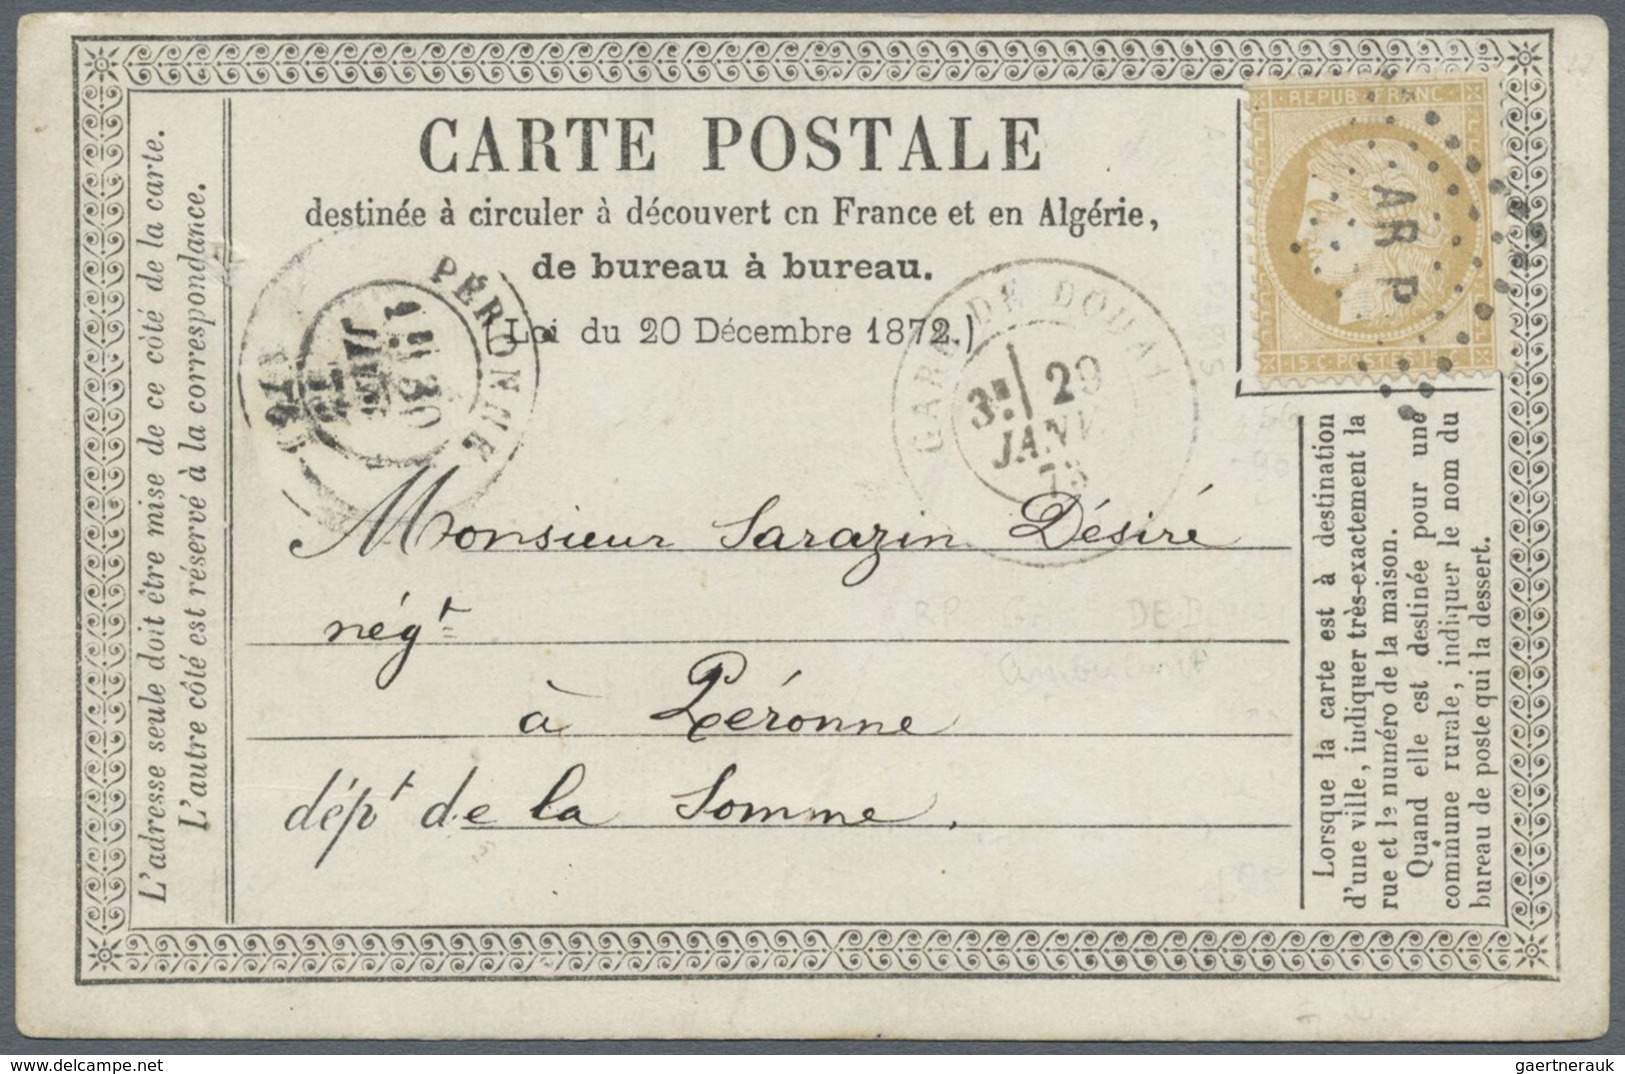 Br Frankreich: 1860/1970 (ca.), French Railway, accumulation of apprx. 230 covers/cards, varied conditi